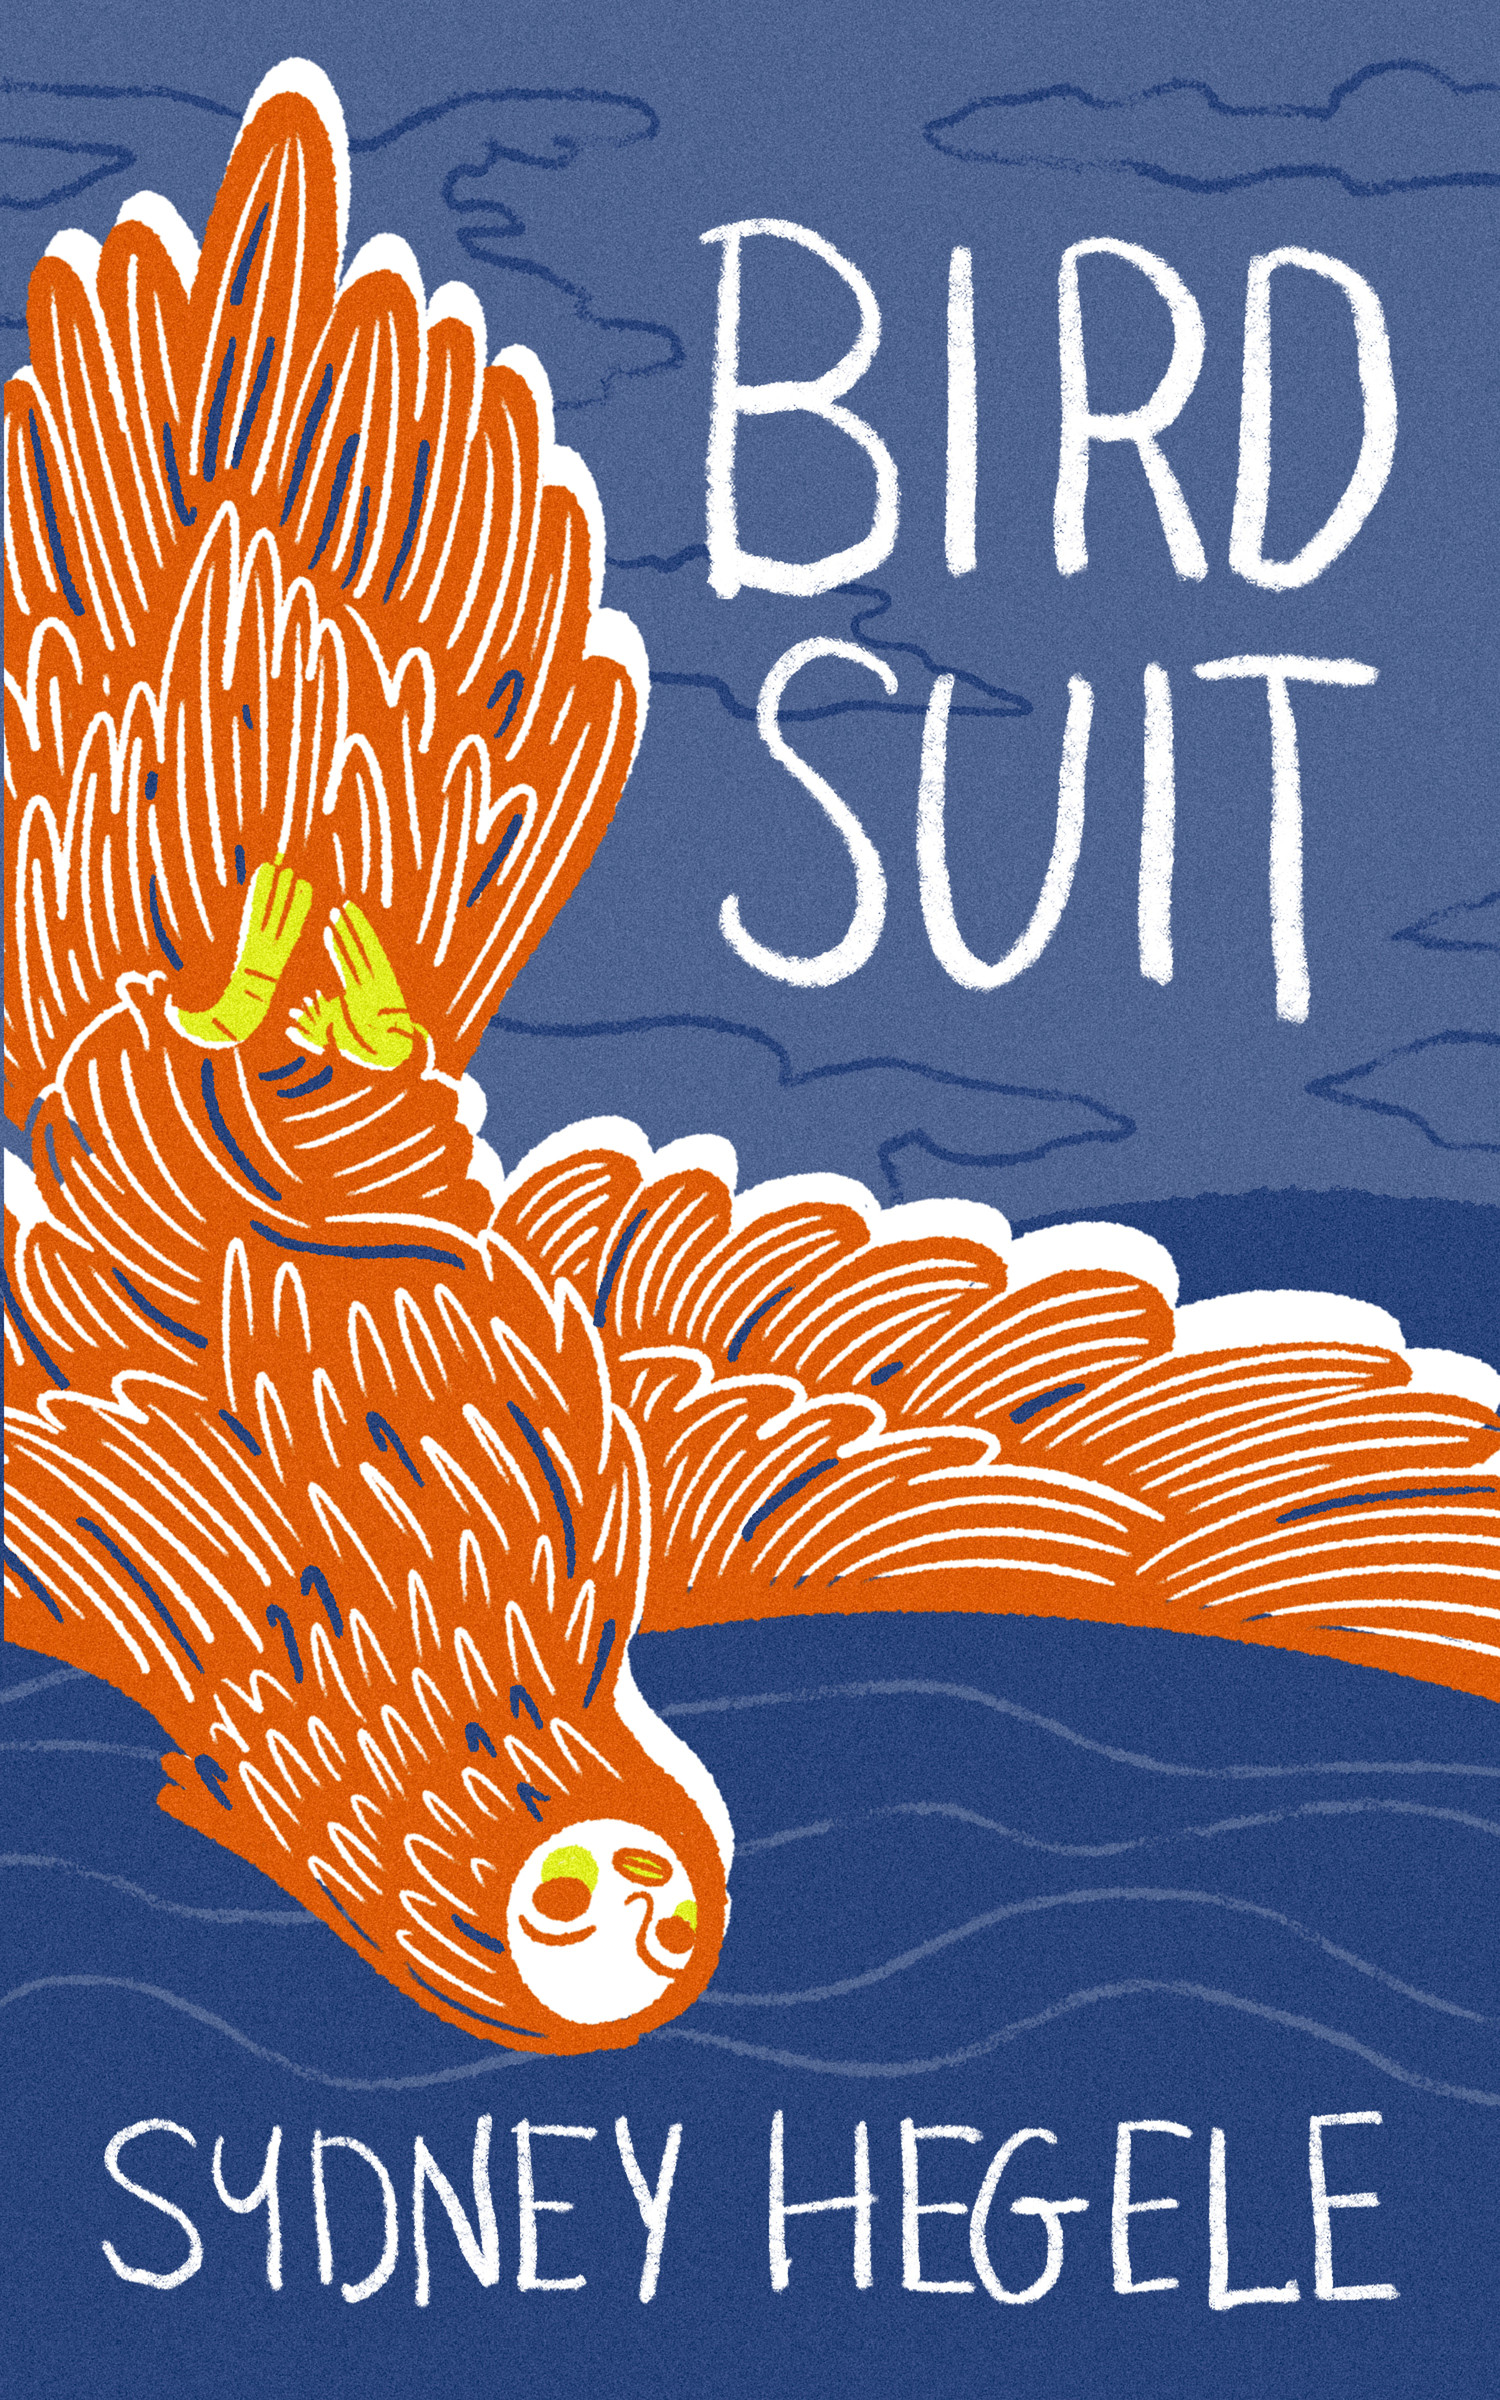 The cover of Bird Suit by Sydney Hegele.